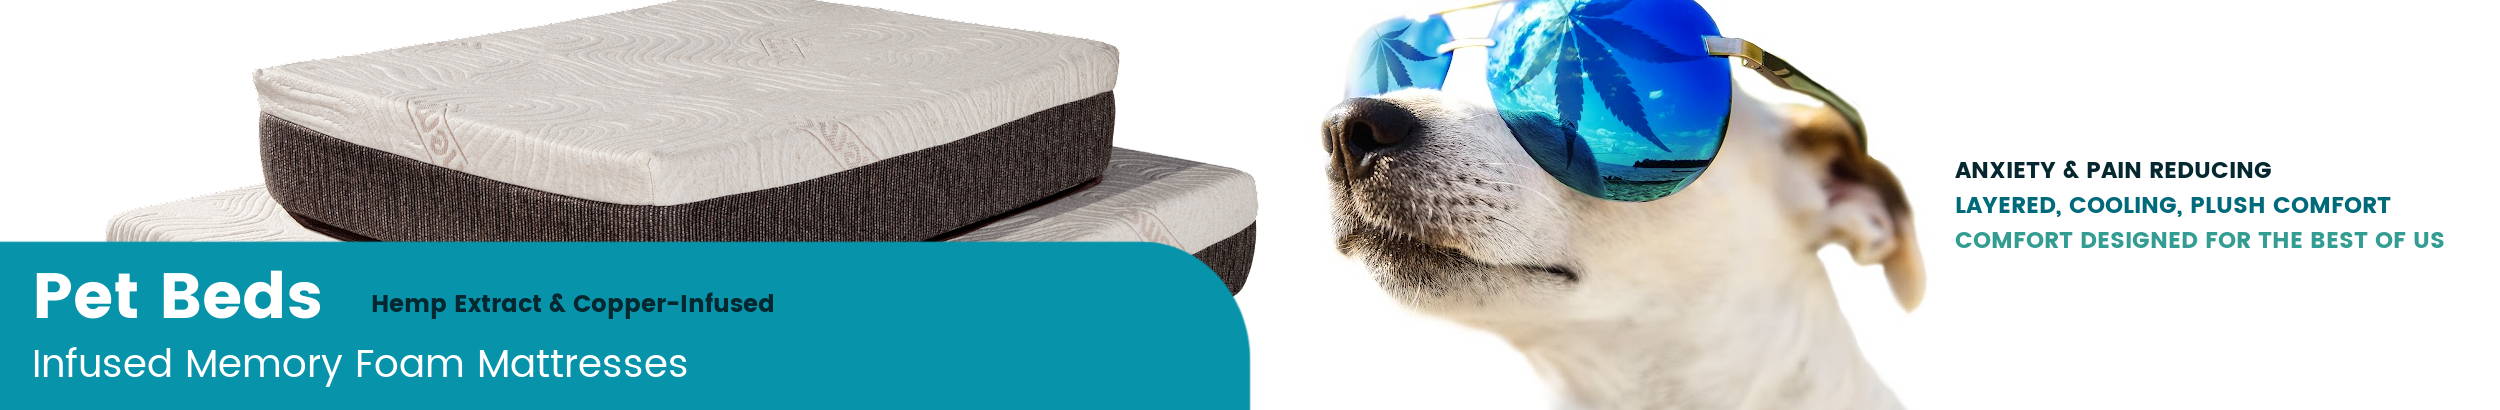 CBD and copper infused pet beds are anxiety and pain reducing while cooling with plush comfort designed for the best of us.